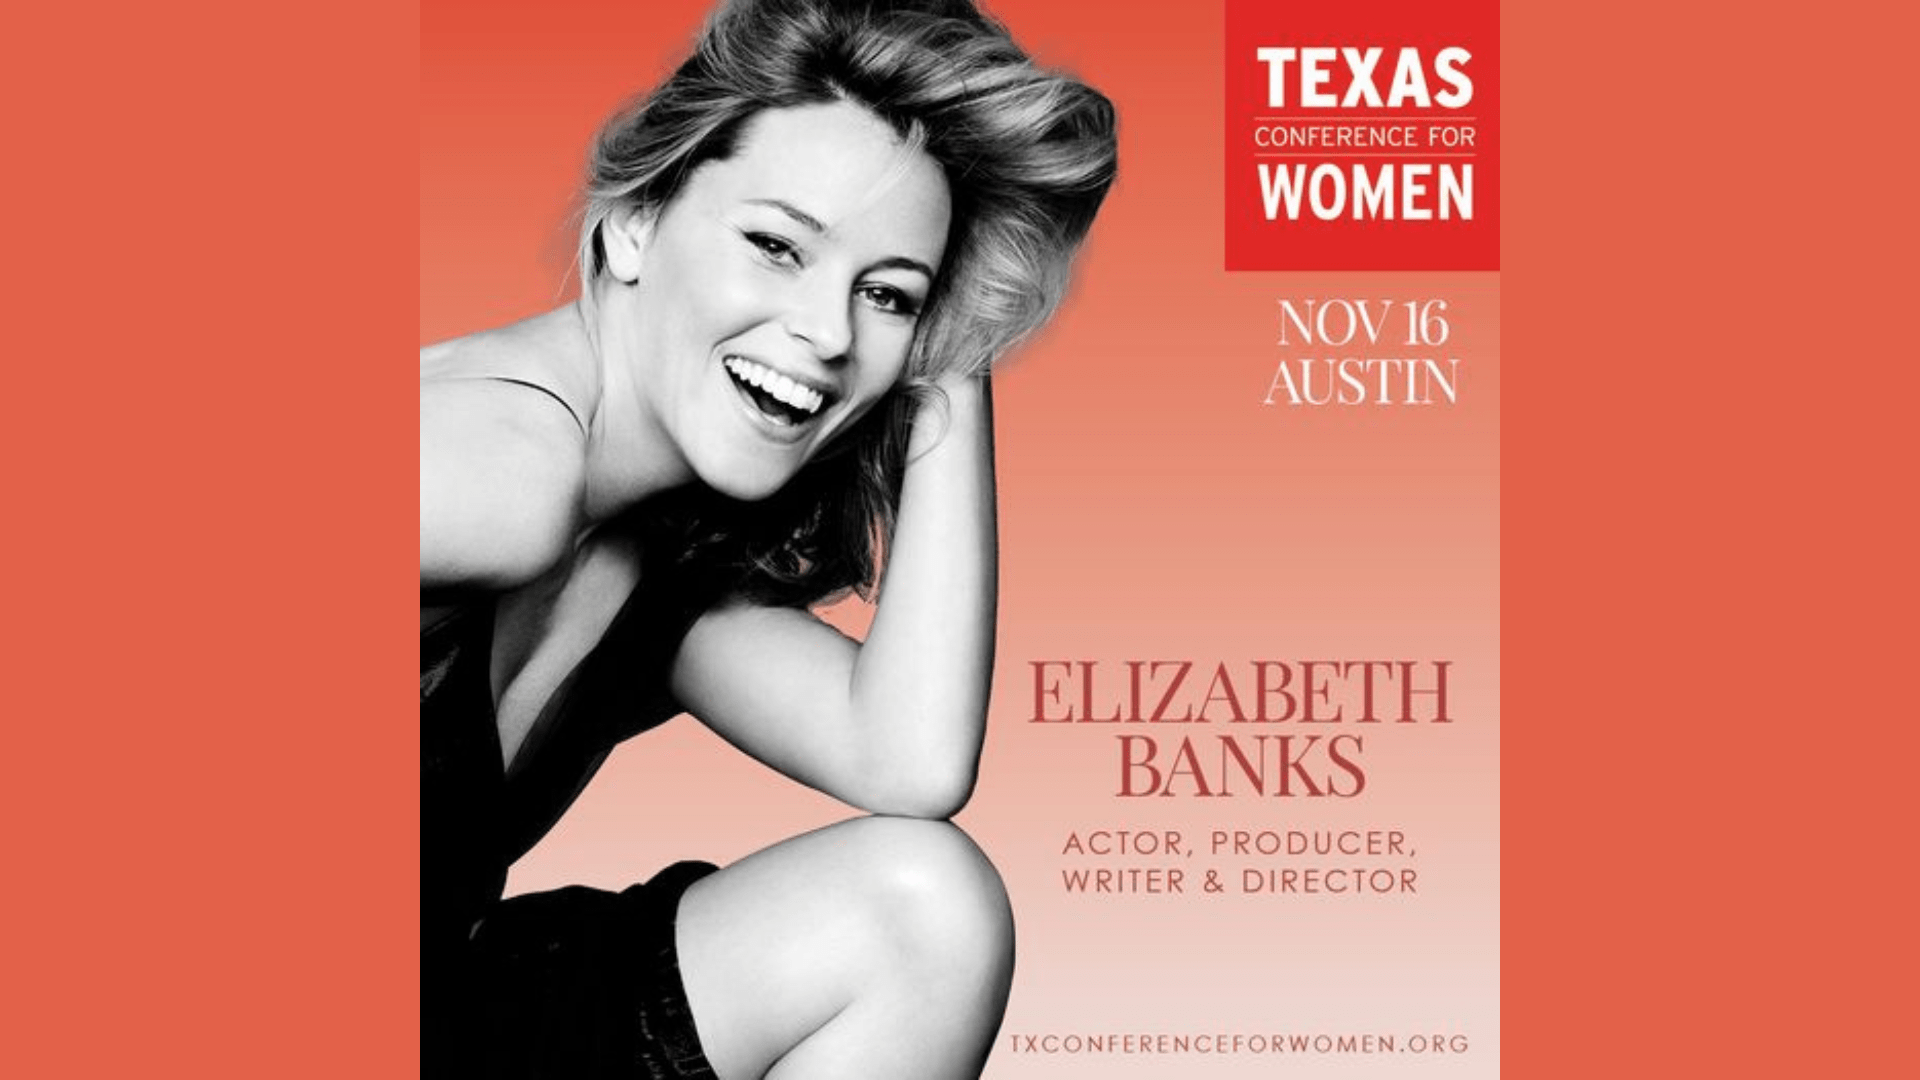 Texas Conference for Women 24th Anniversary Lucy 93.3